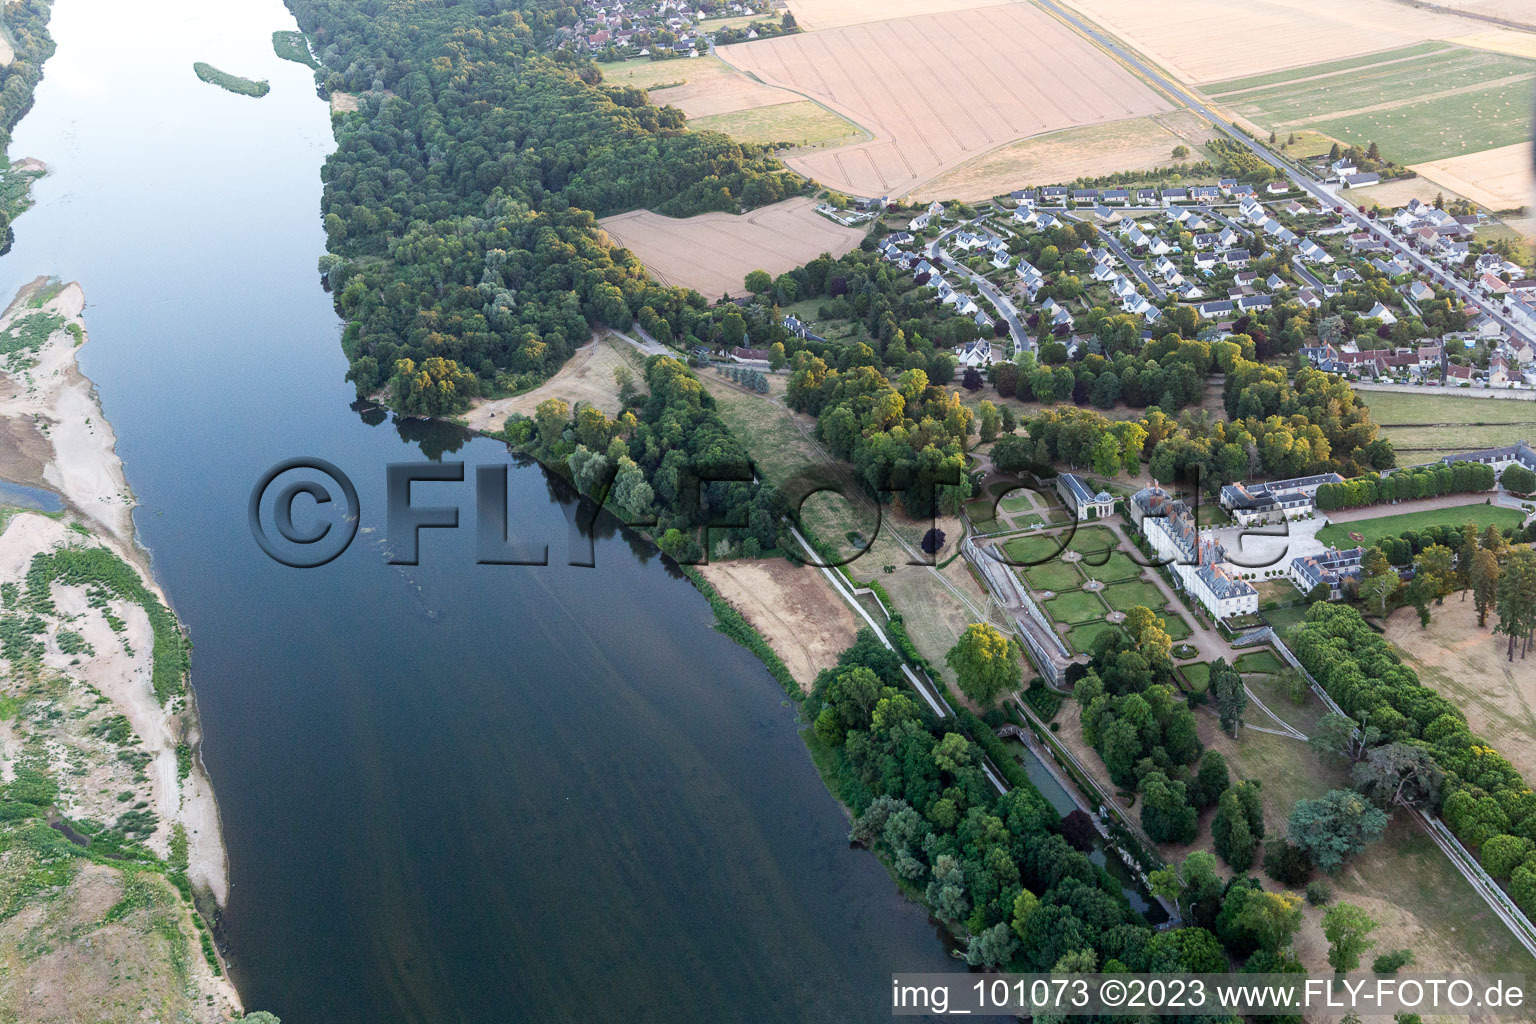 Menars in the state Loir et Cher, France from a drone